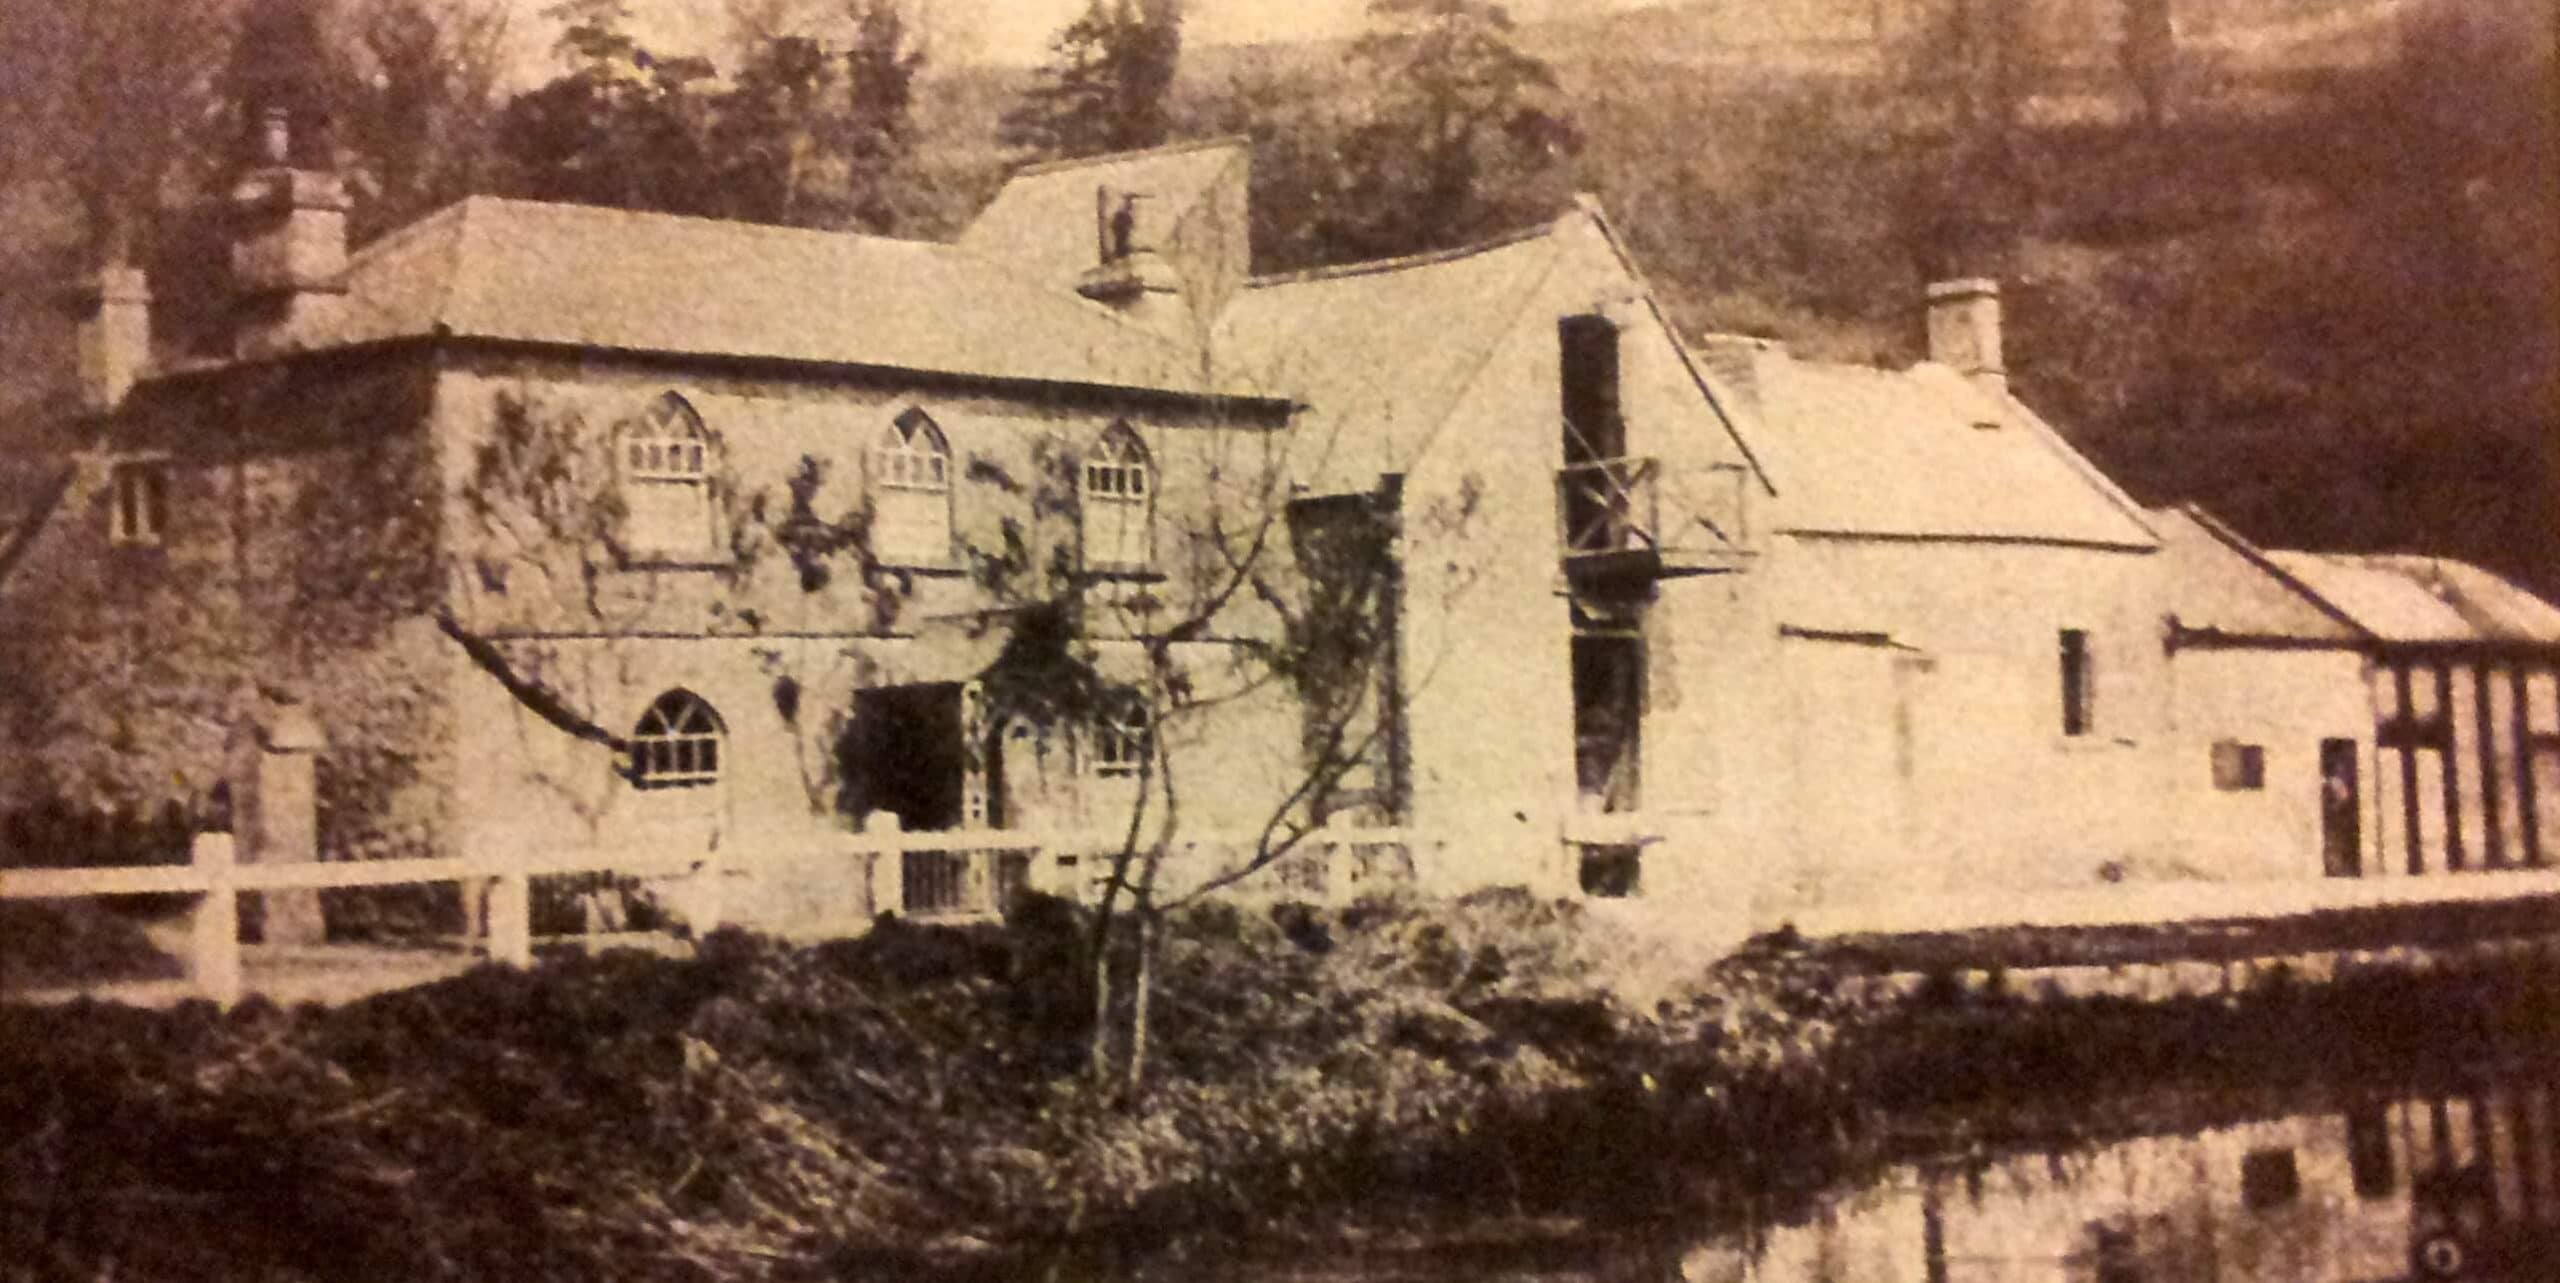 Tucking Mill about 1905